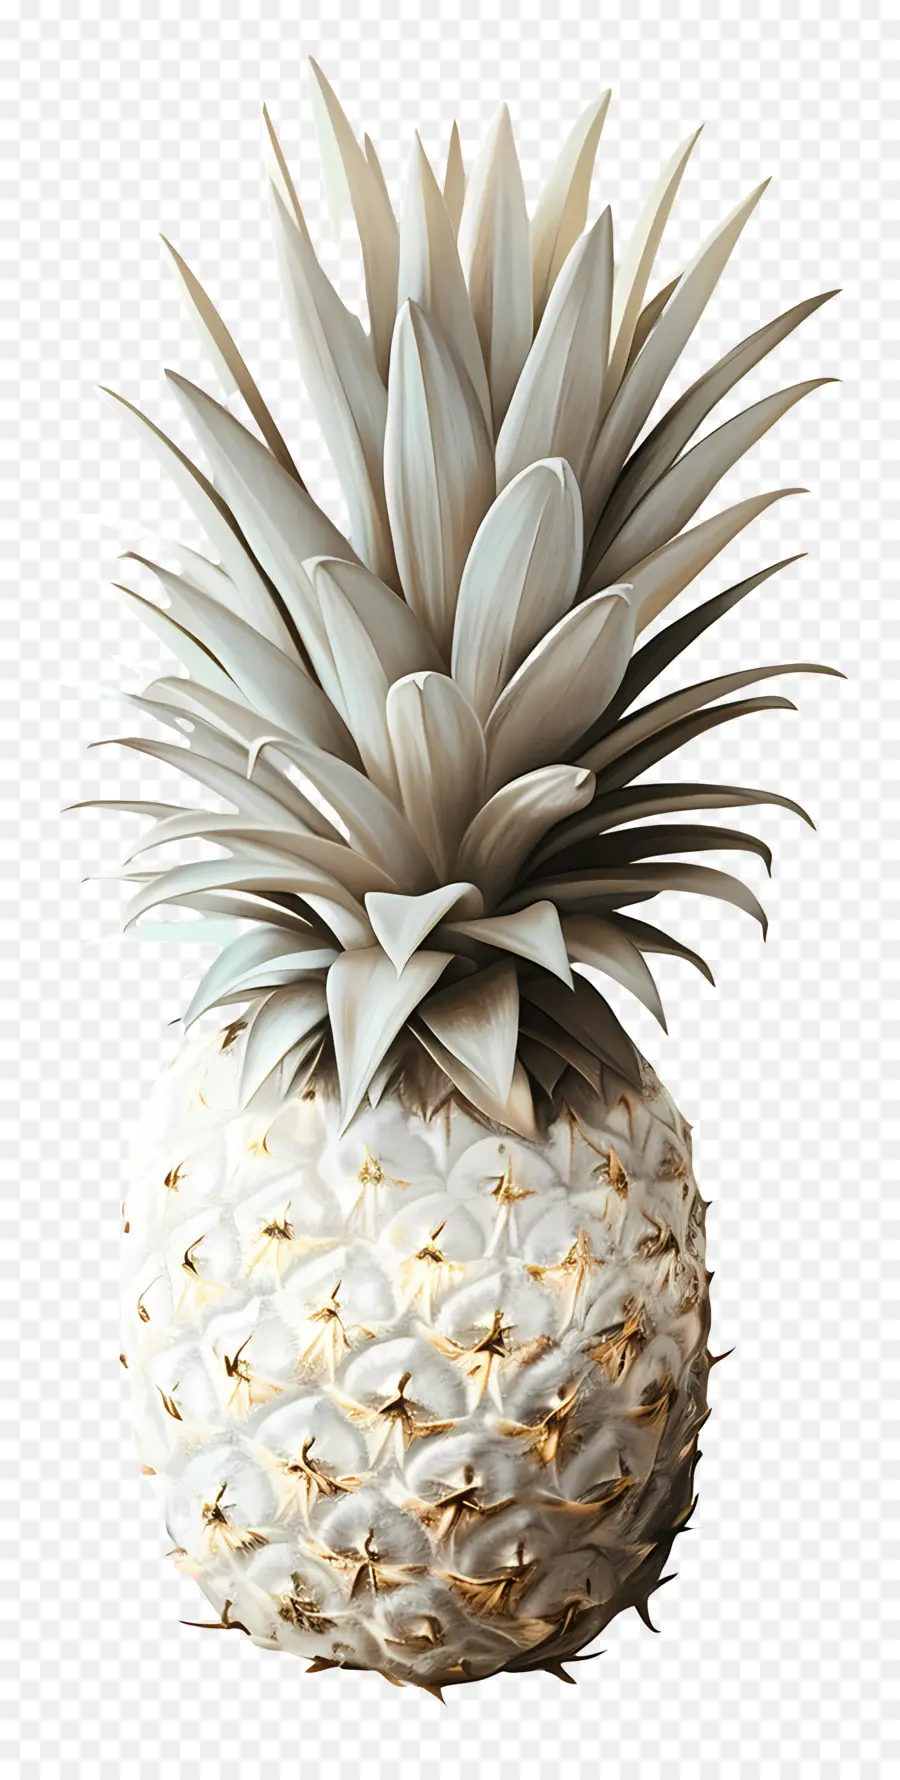 L'ananas，Or L'ananas PNG